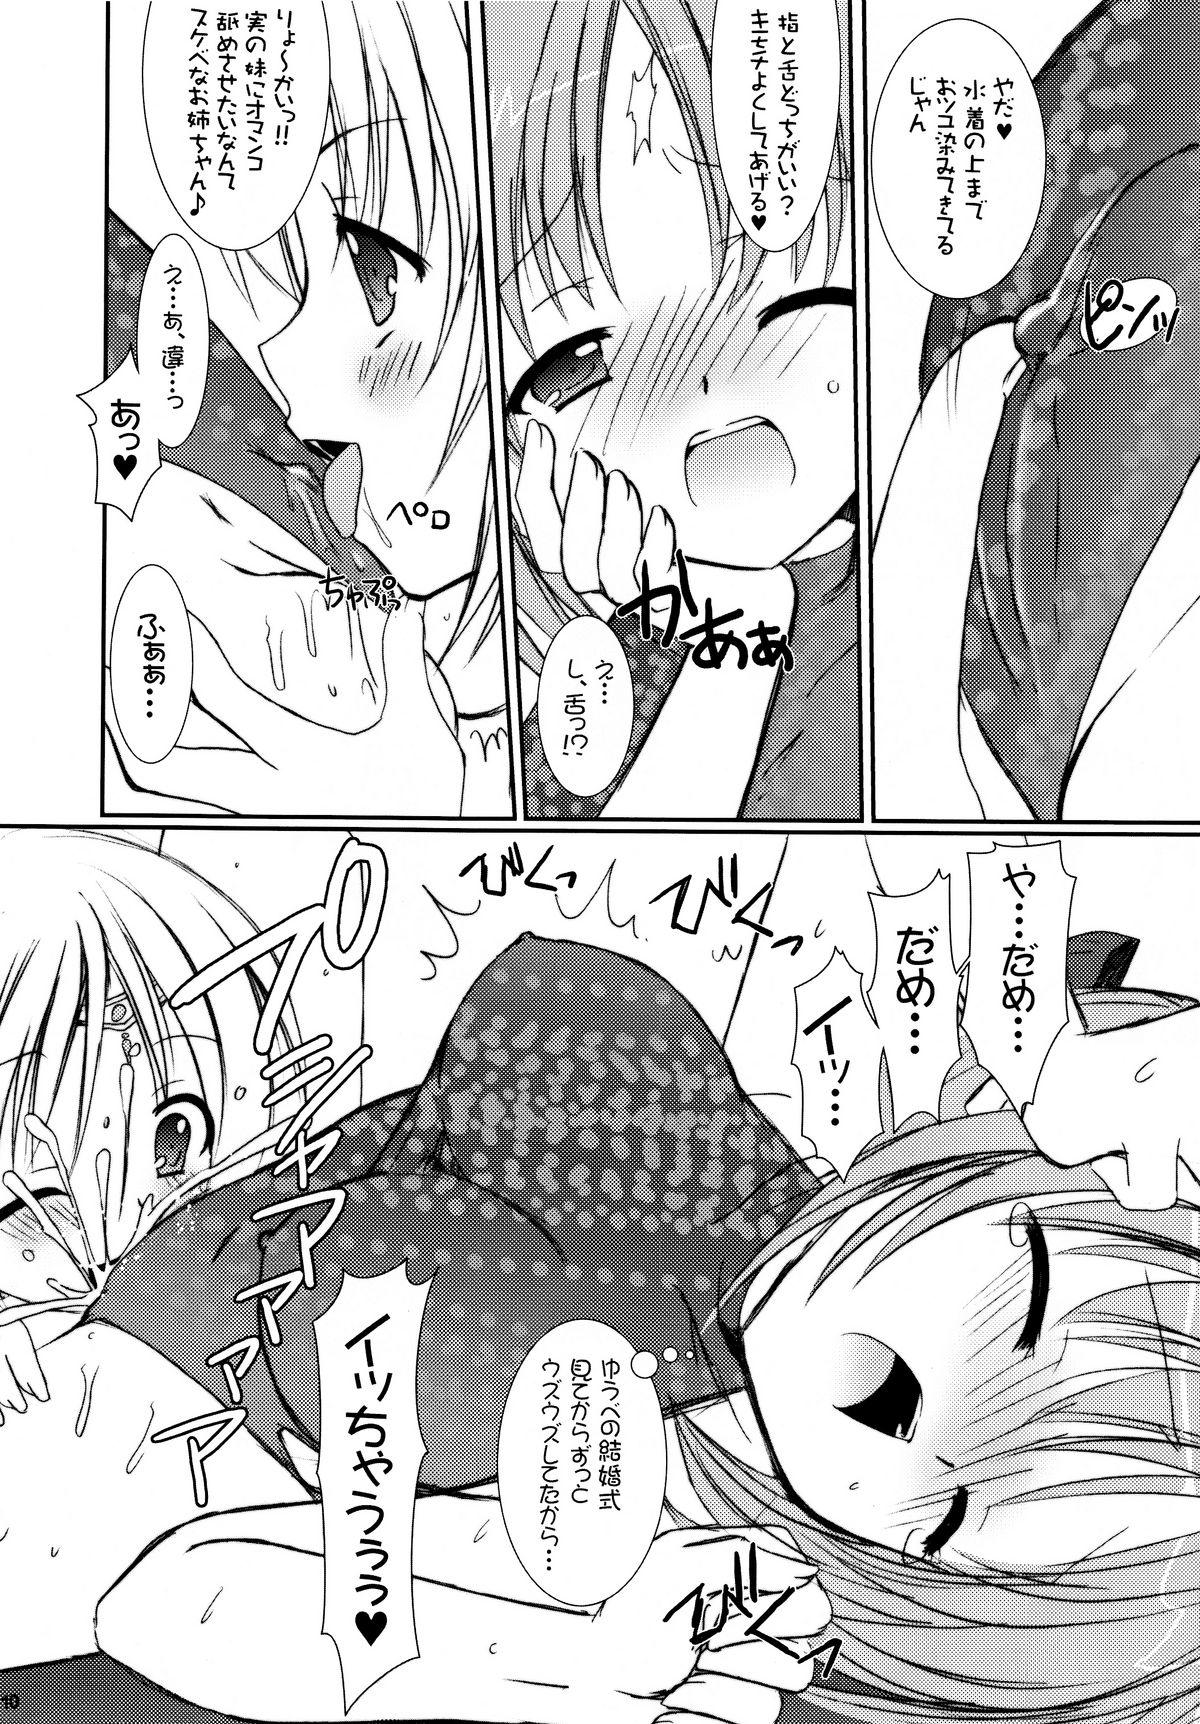 Tied Lovely Poison 7 - Ragnarok online 3some - Page 10